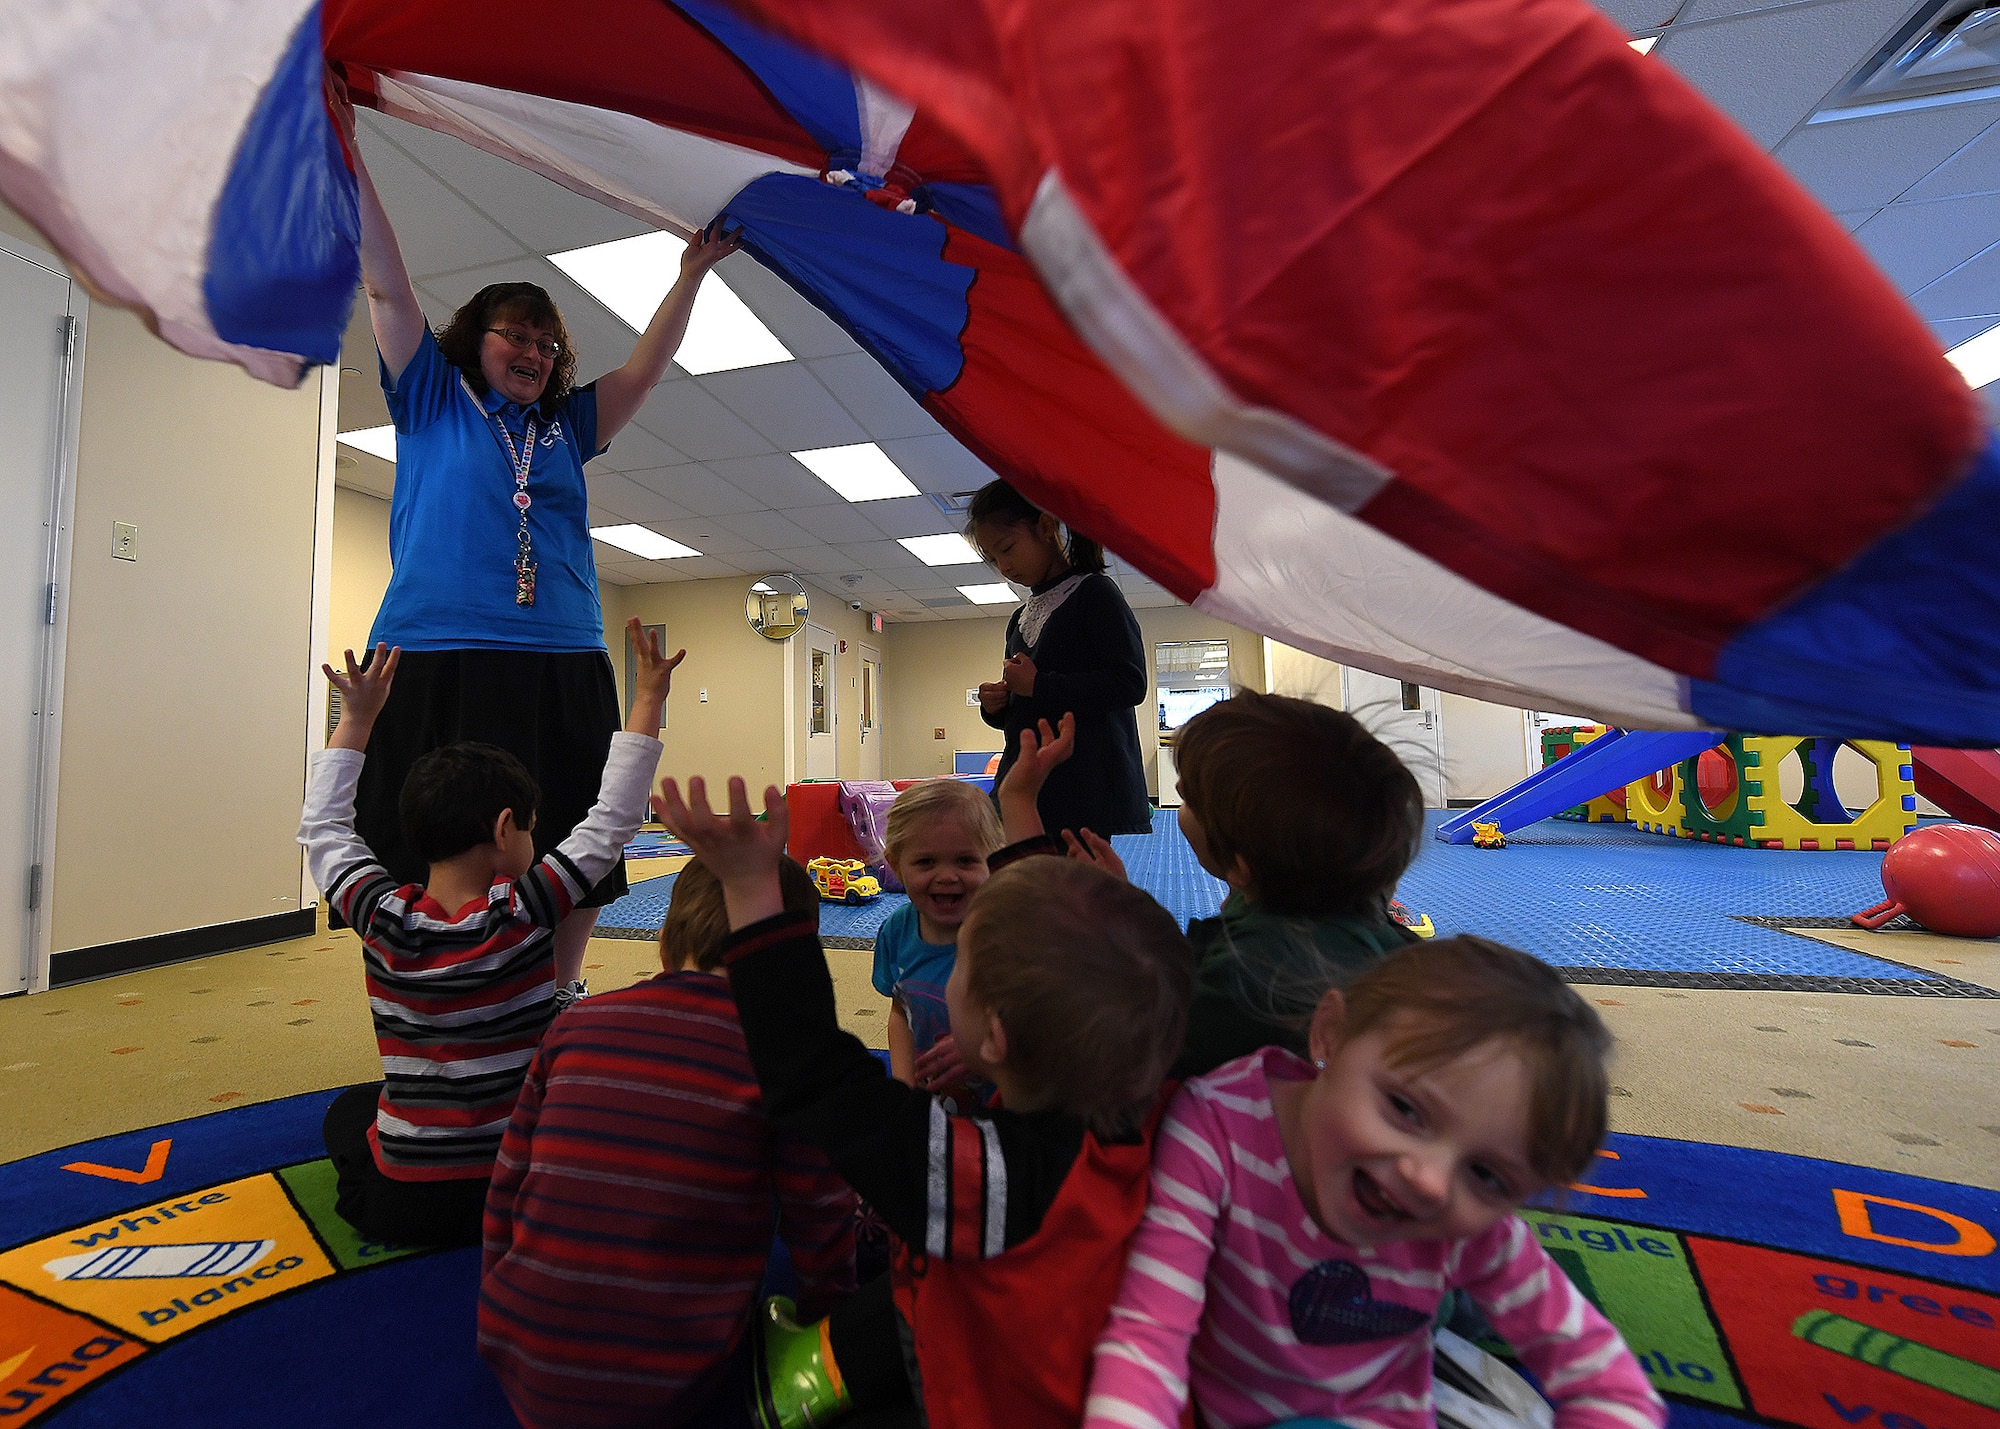 Michele Southall, Grand Forks Air Force Base Child Development Center lead program technician, lifts a parachute over her students Feb. 28, 2017, on Grand Forks AFB, N.D. Southall recently received the Terri Lynne Lokoff/Children’s TYLENOL® National Child Care Teacher Award thanks to her daily work and dedication to her students. (U.S. Air Force photo by Senior Airman Ryan Sparks)